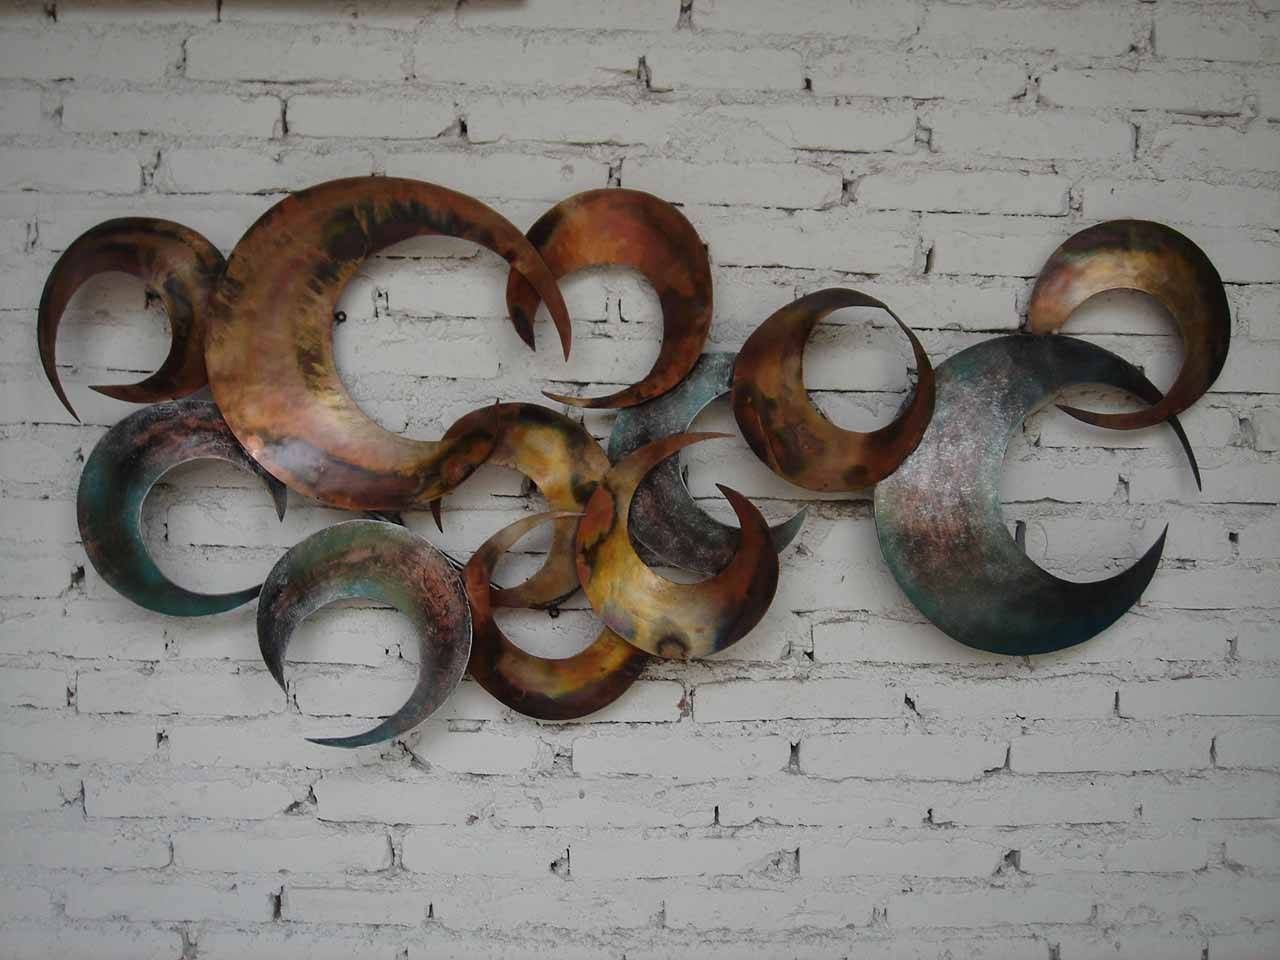 Stupendous Metal Wall Art Panels Outdoor Mgctlbxnmzp Mgctlbxv Within Most Popular Ash Carl Metal Art (Gallery 23 of 30)